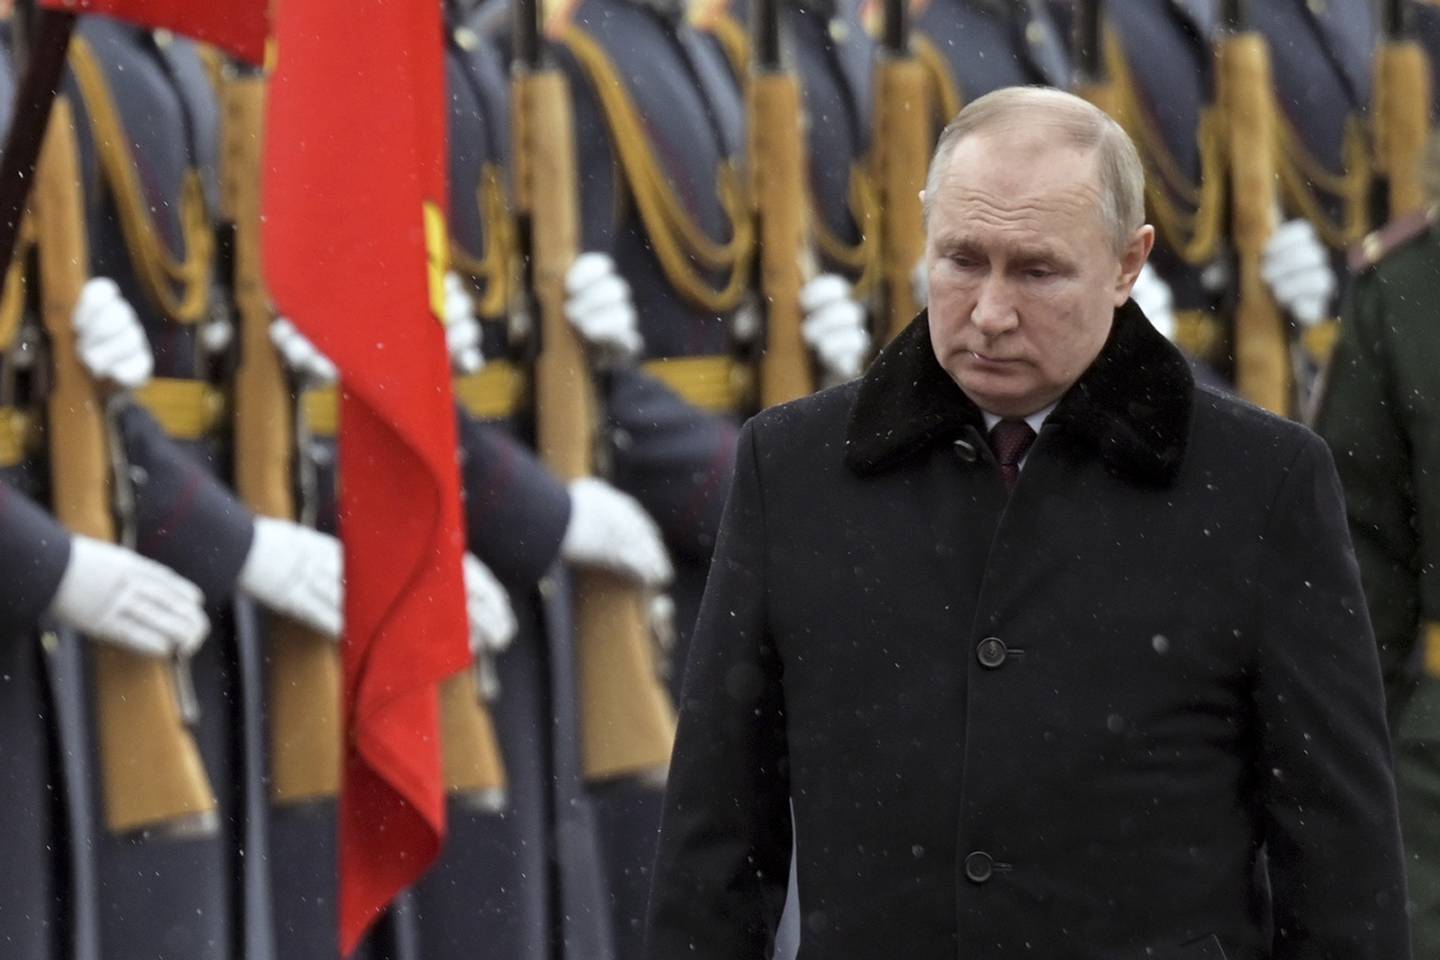 Russian President Vladimir Putin attends a wreath-laying ceremony at the Tomb of the Unknown Soldier during 'Defender of the Fatherland Day' in Moscow on Wednesday. AP